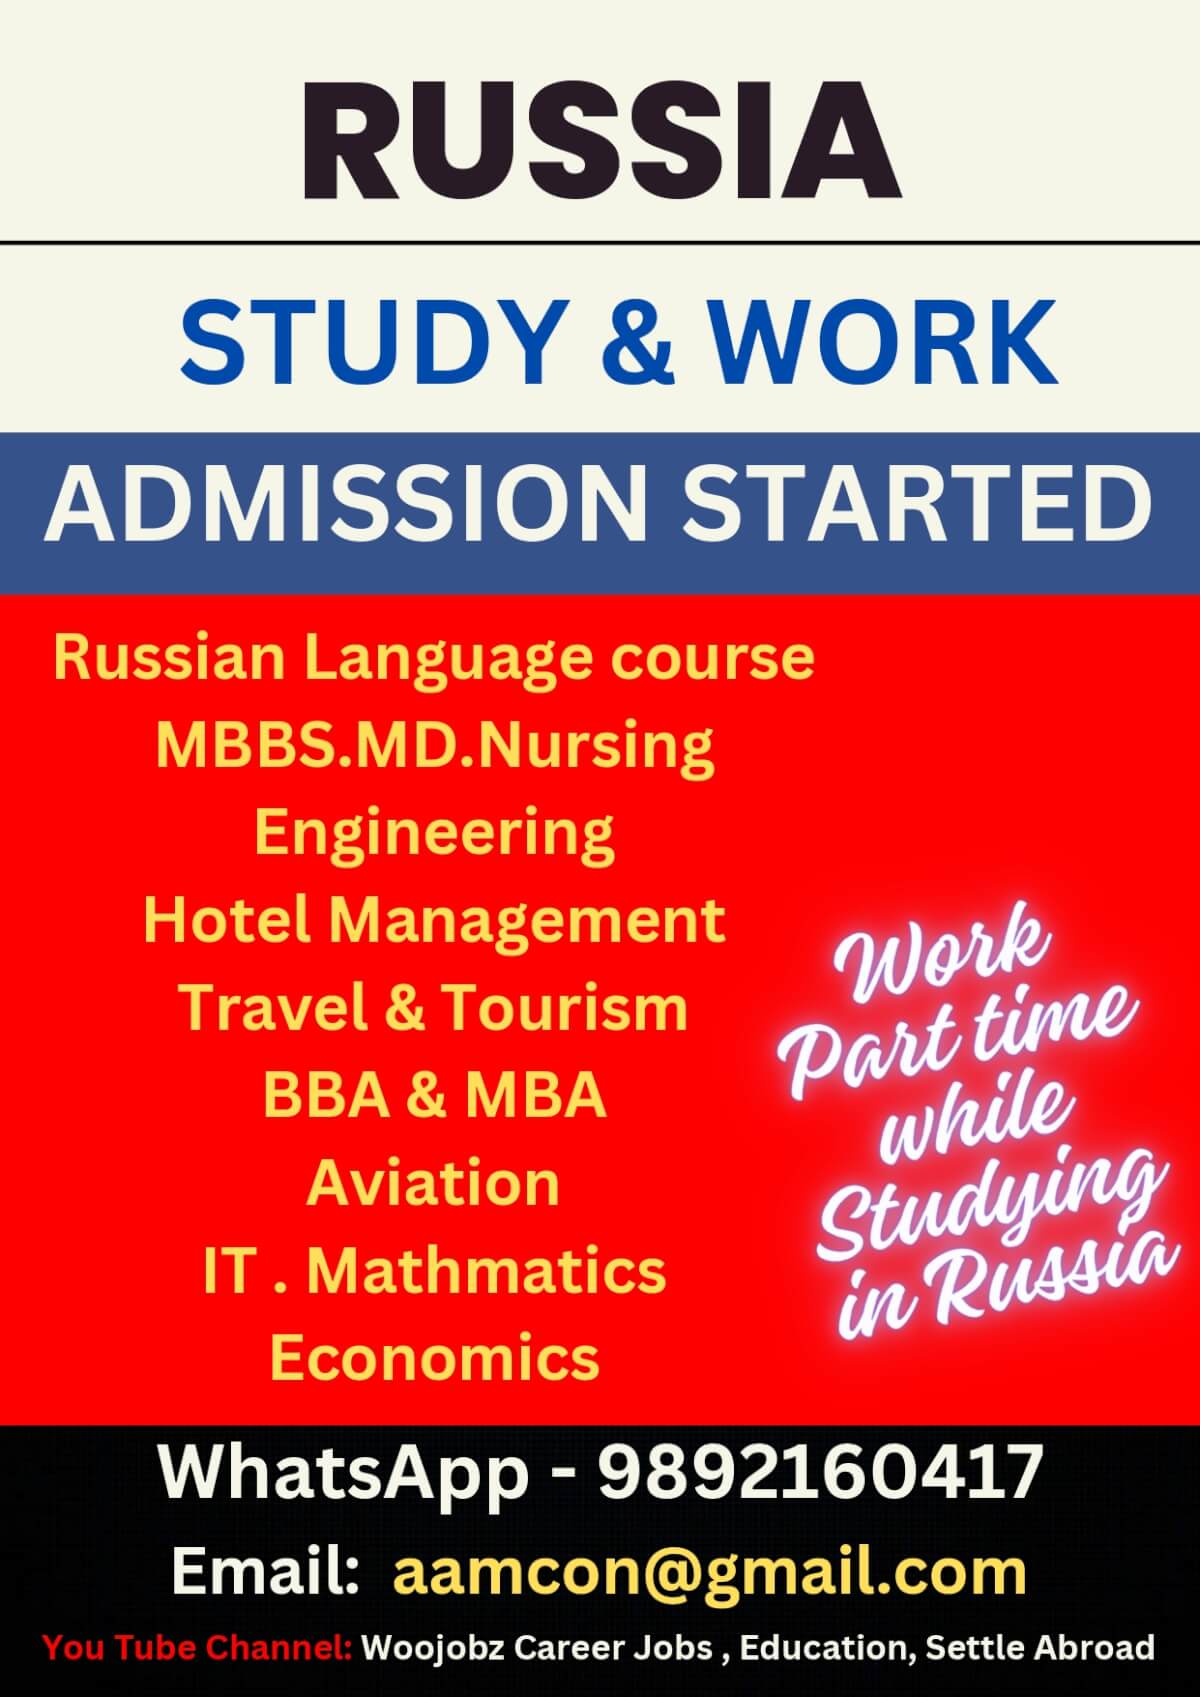 Study and work in Russia